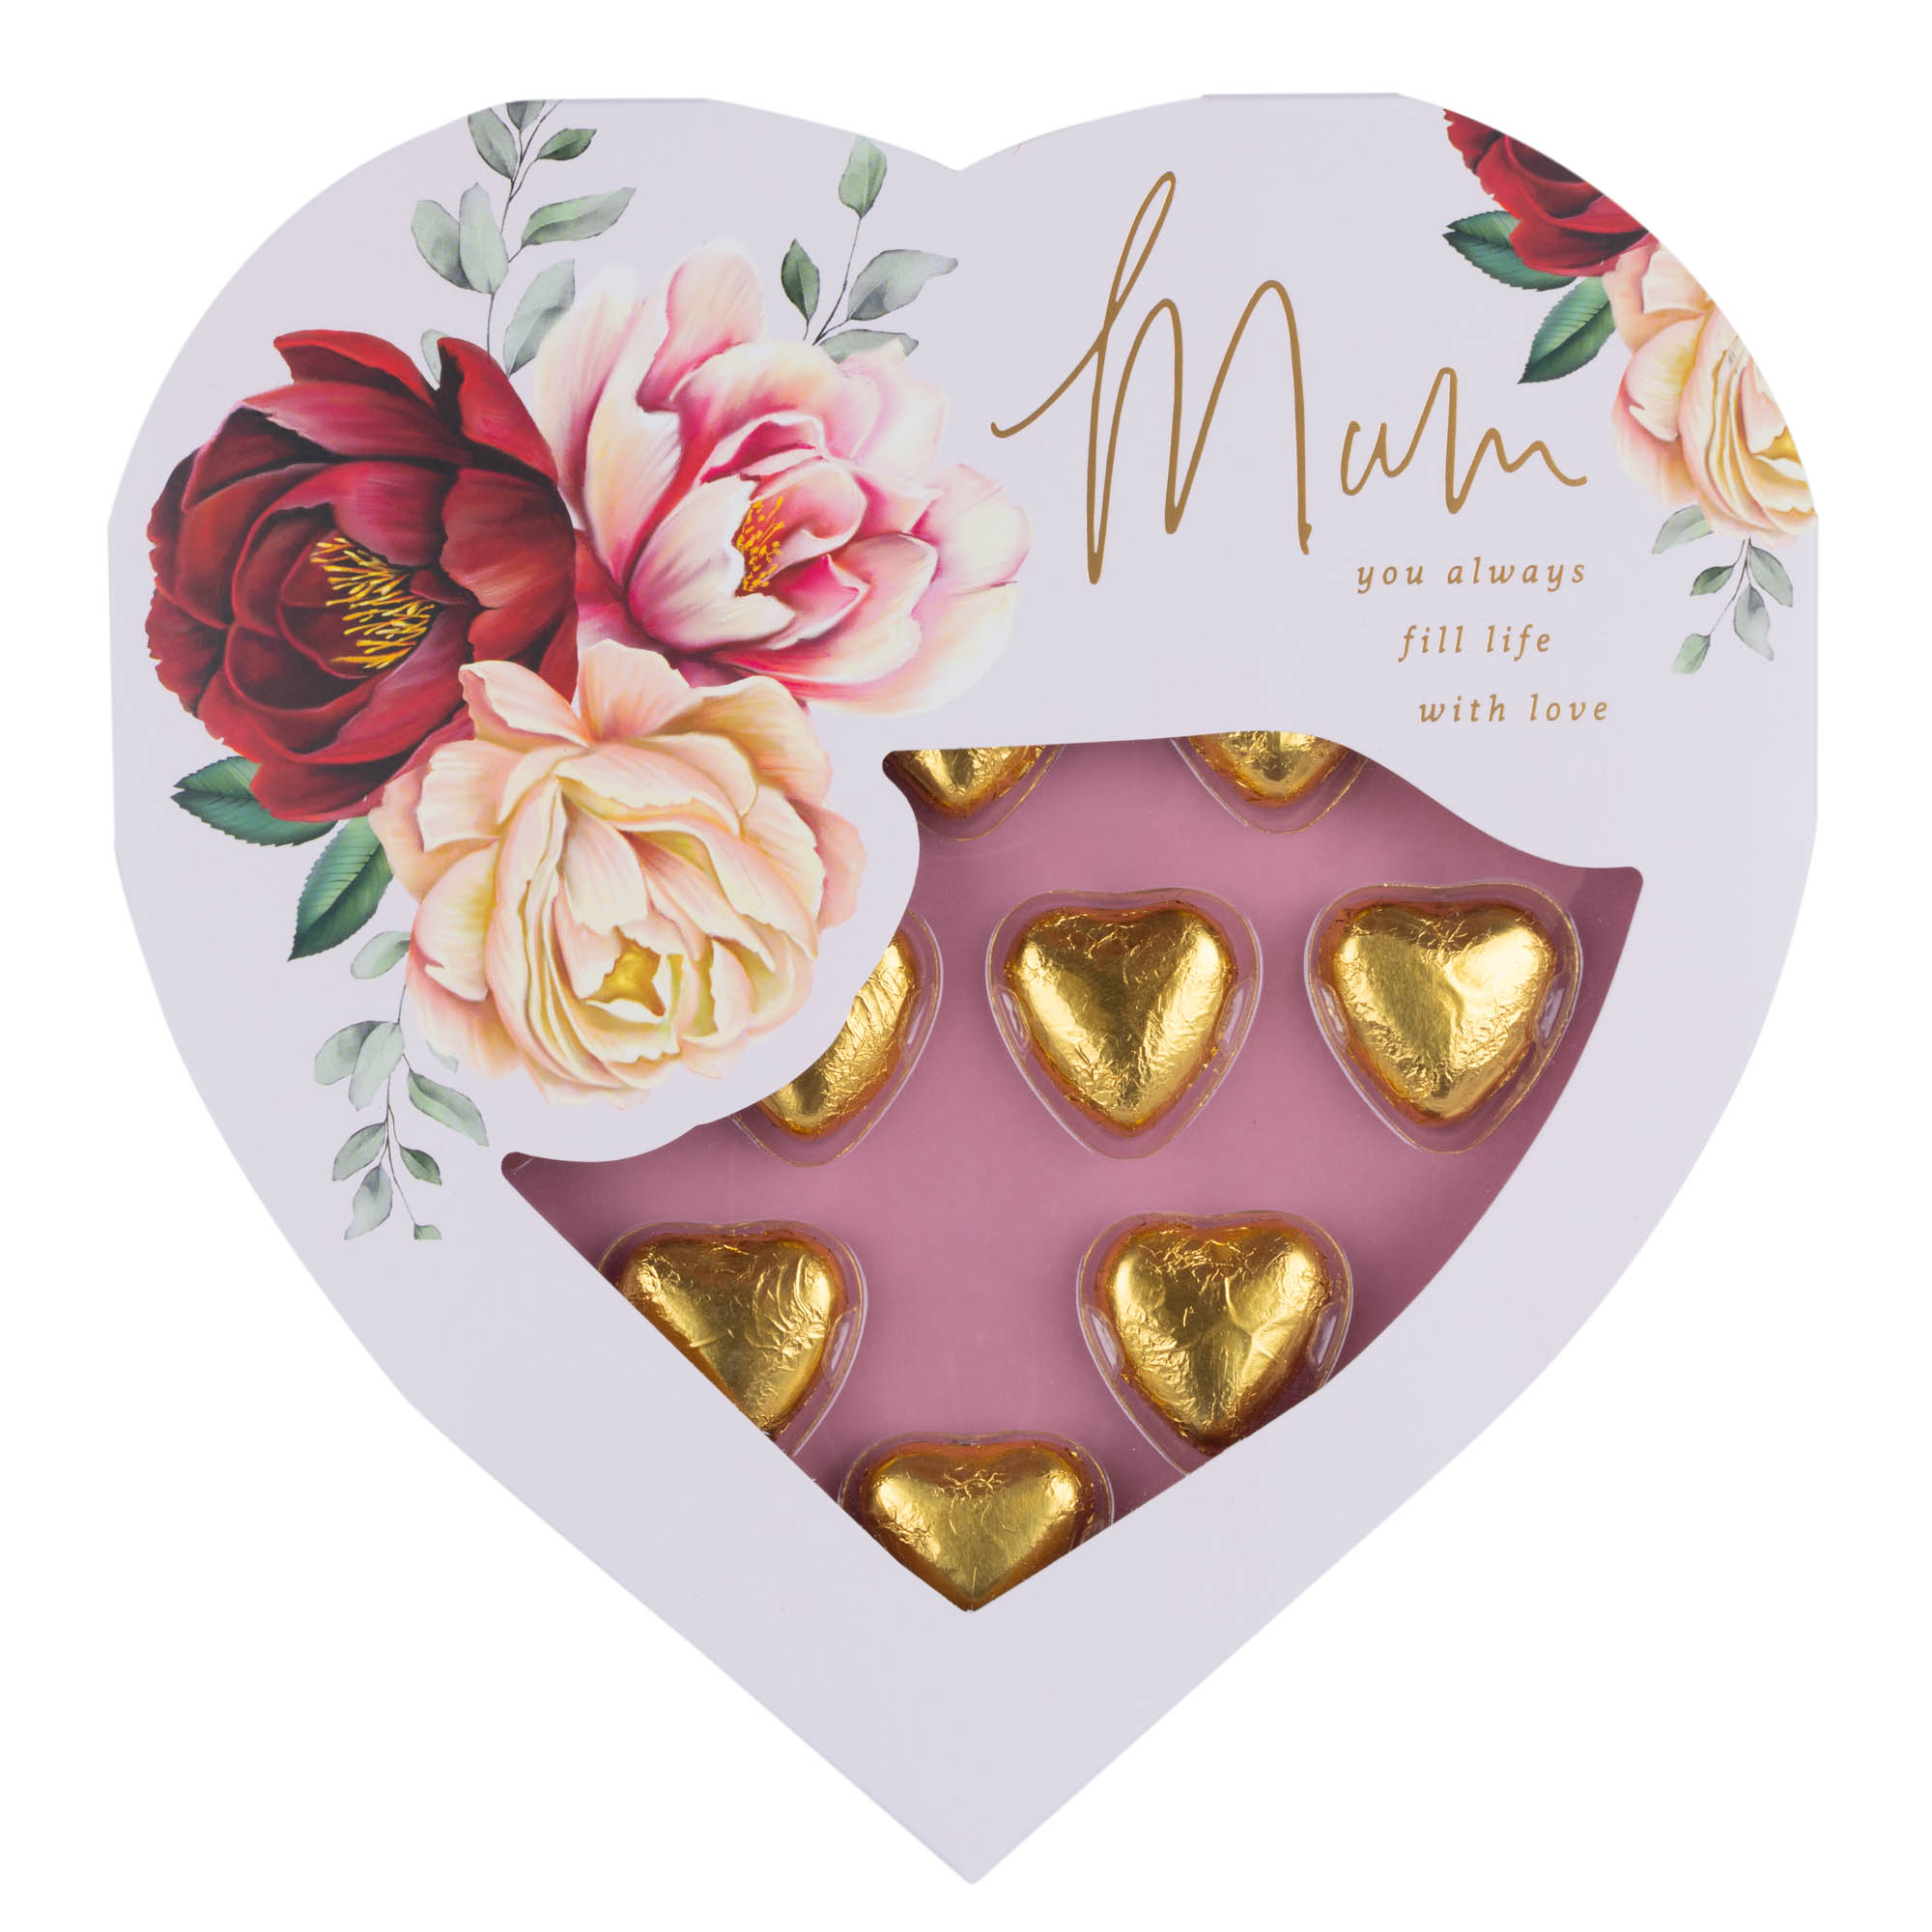 Special Mum Floral Balloon & Chocolate Hearts - Pre-Order For Mother's Day!